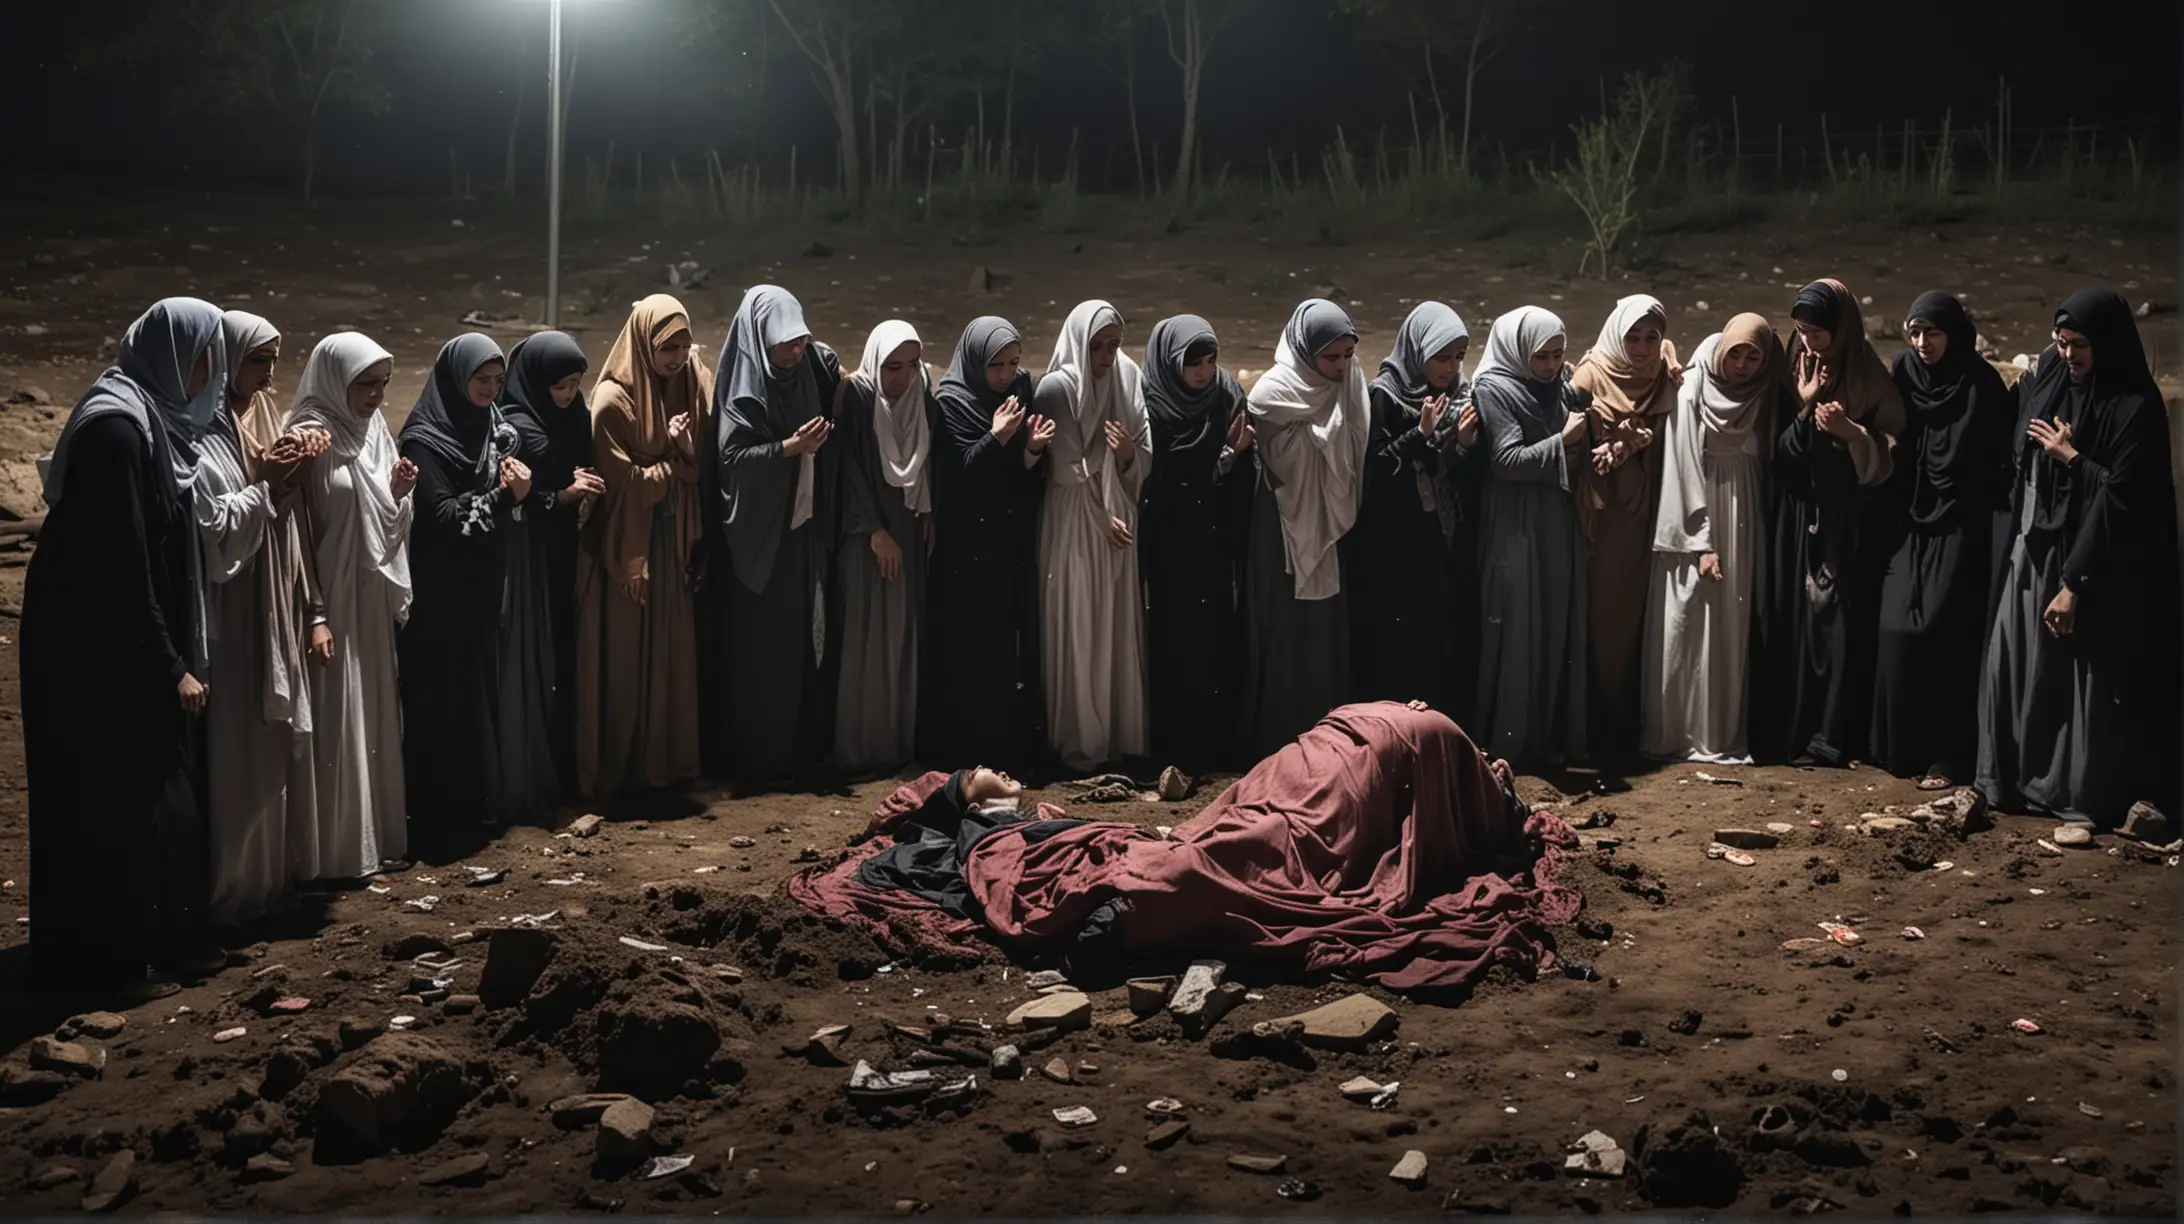 Group of Hijabi Women Mourning at Night by a Dead Body